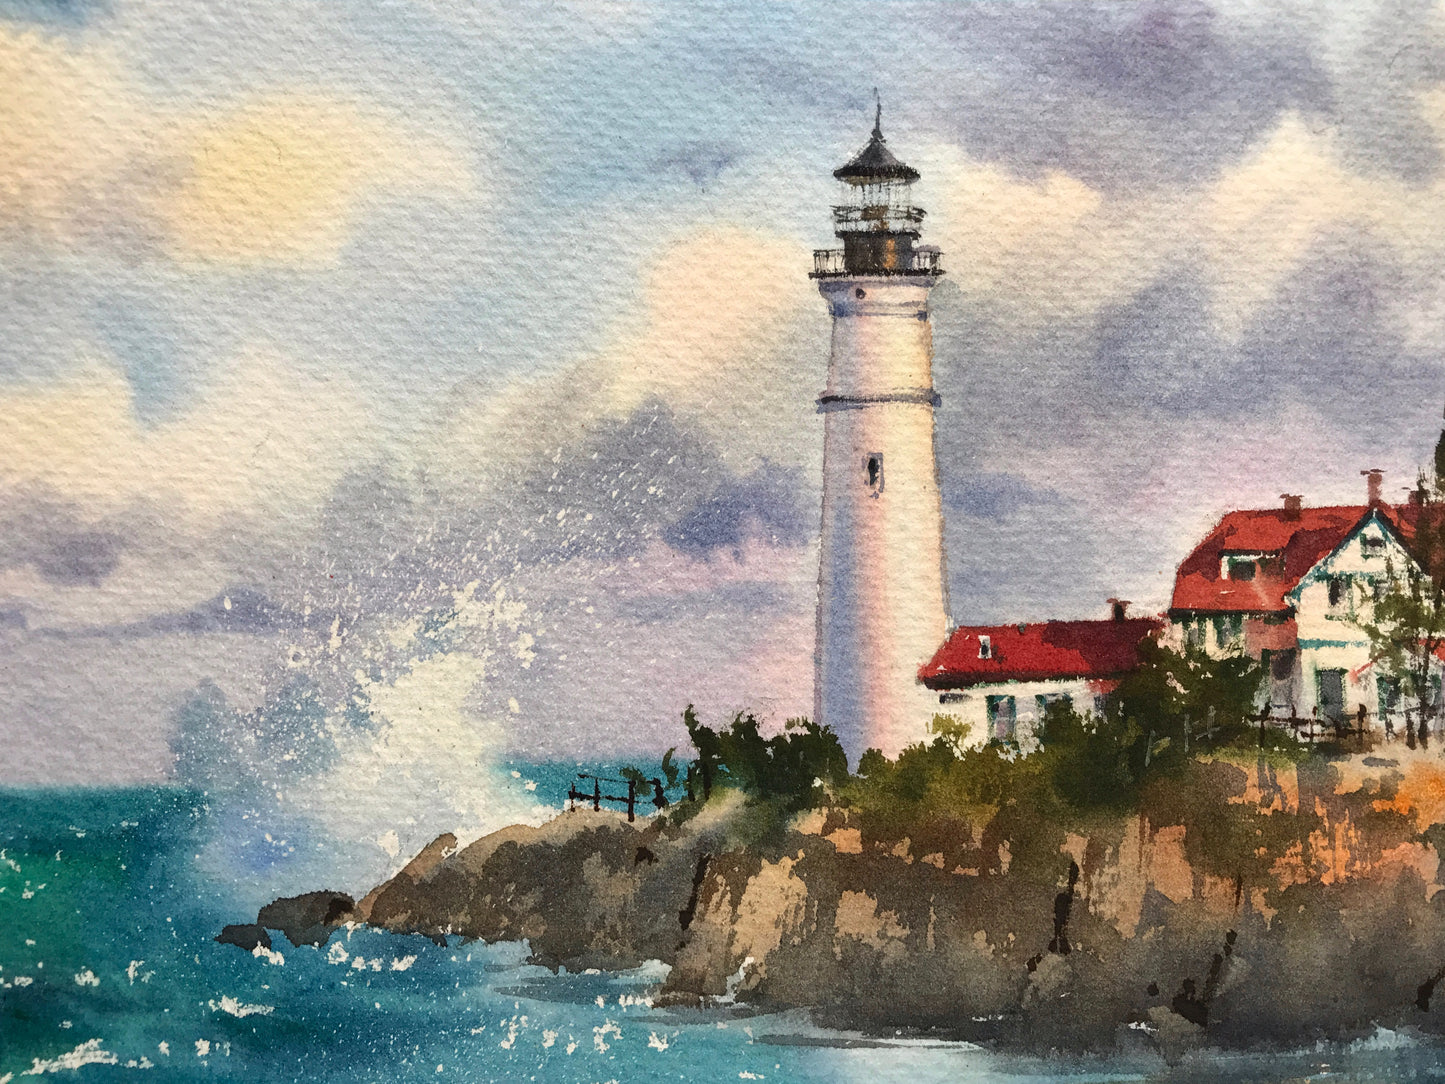 Watercolor Original Painting - Before the storm, Lighthouse #2 - 18x14 in